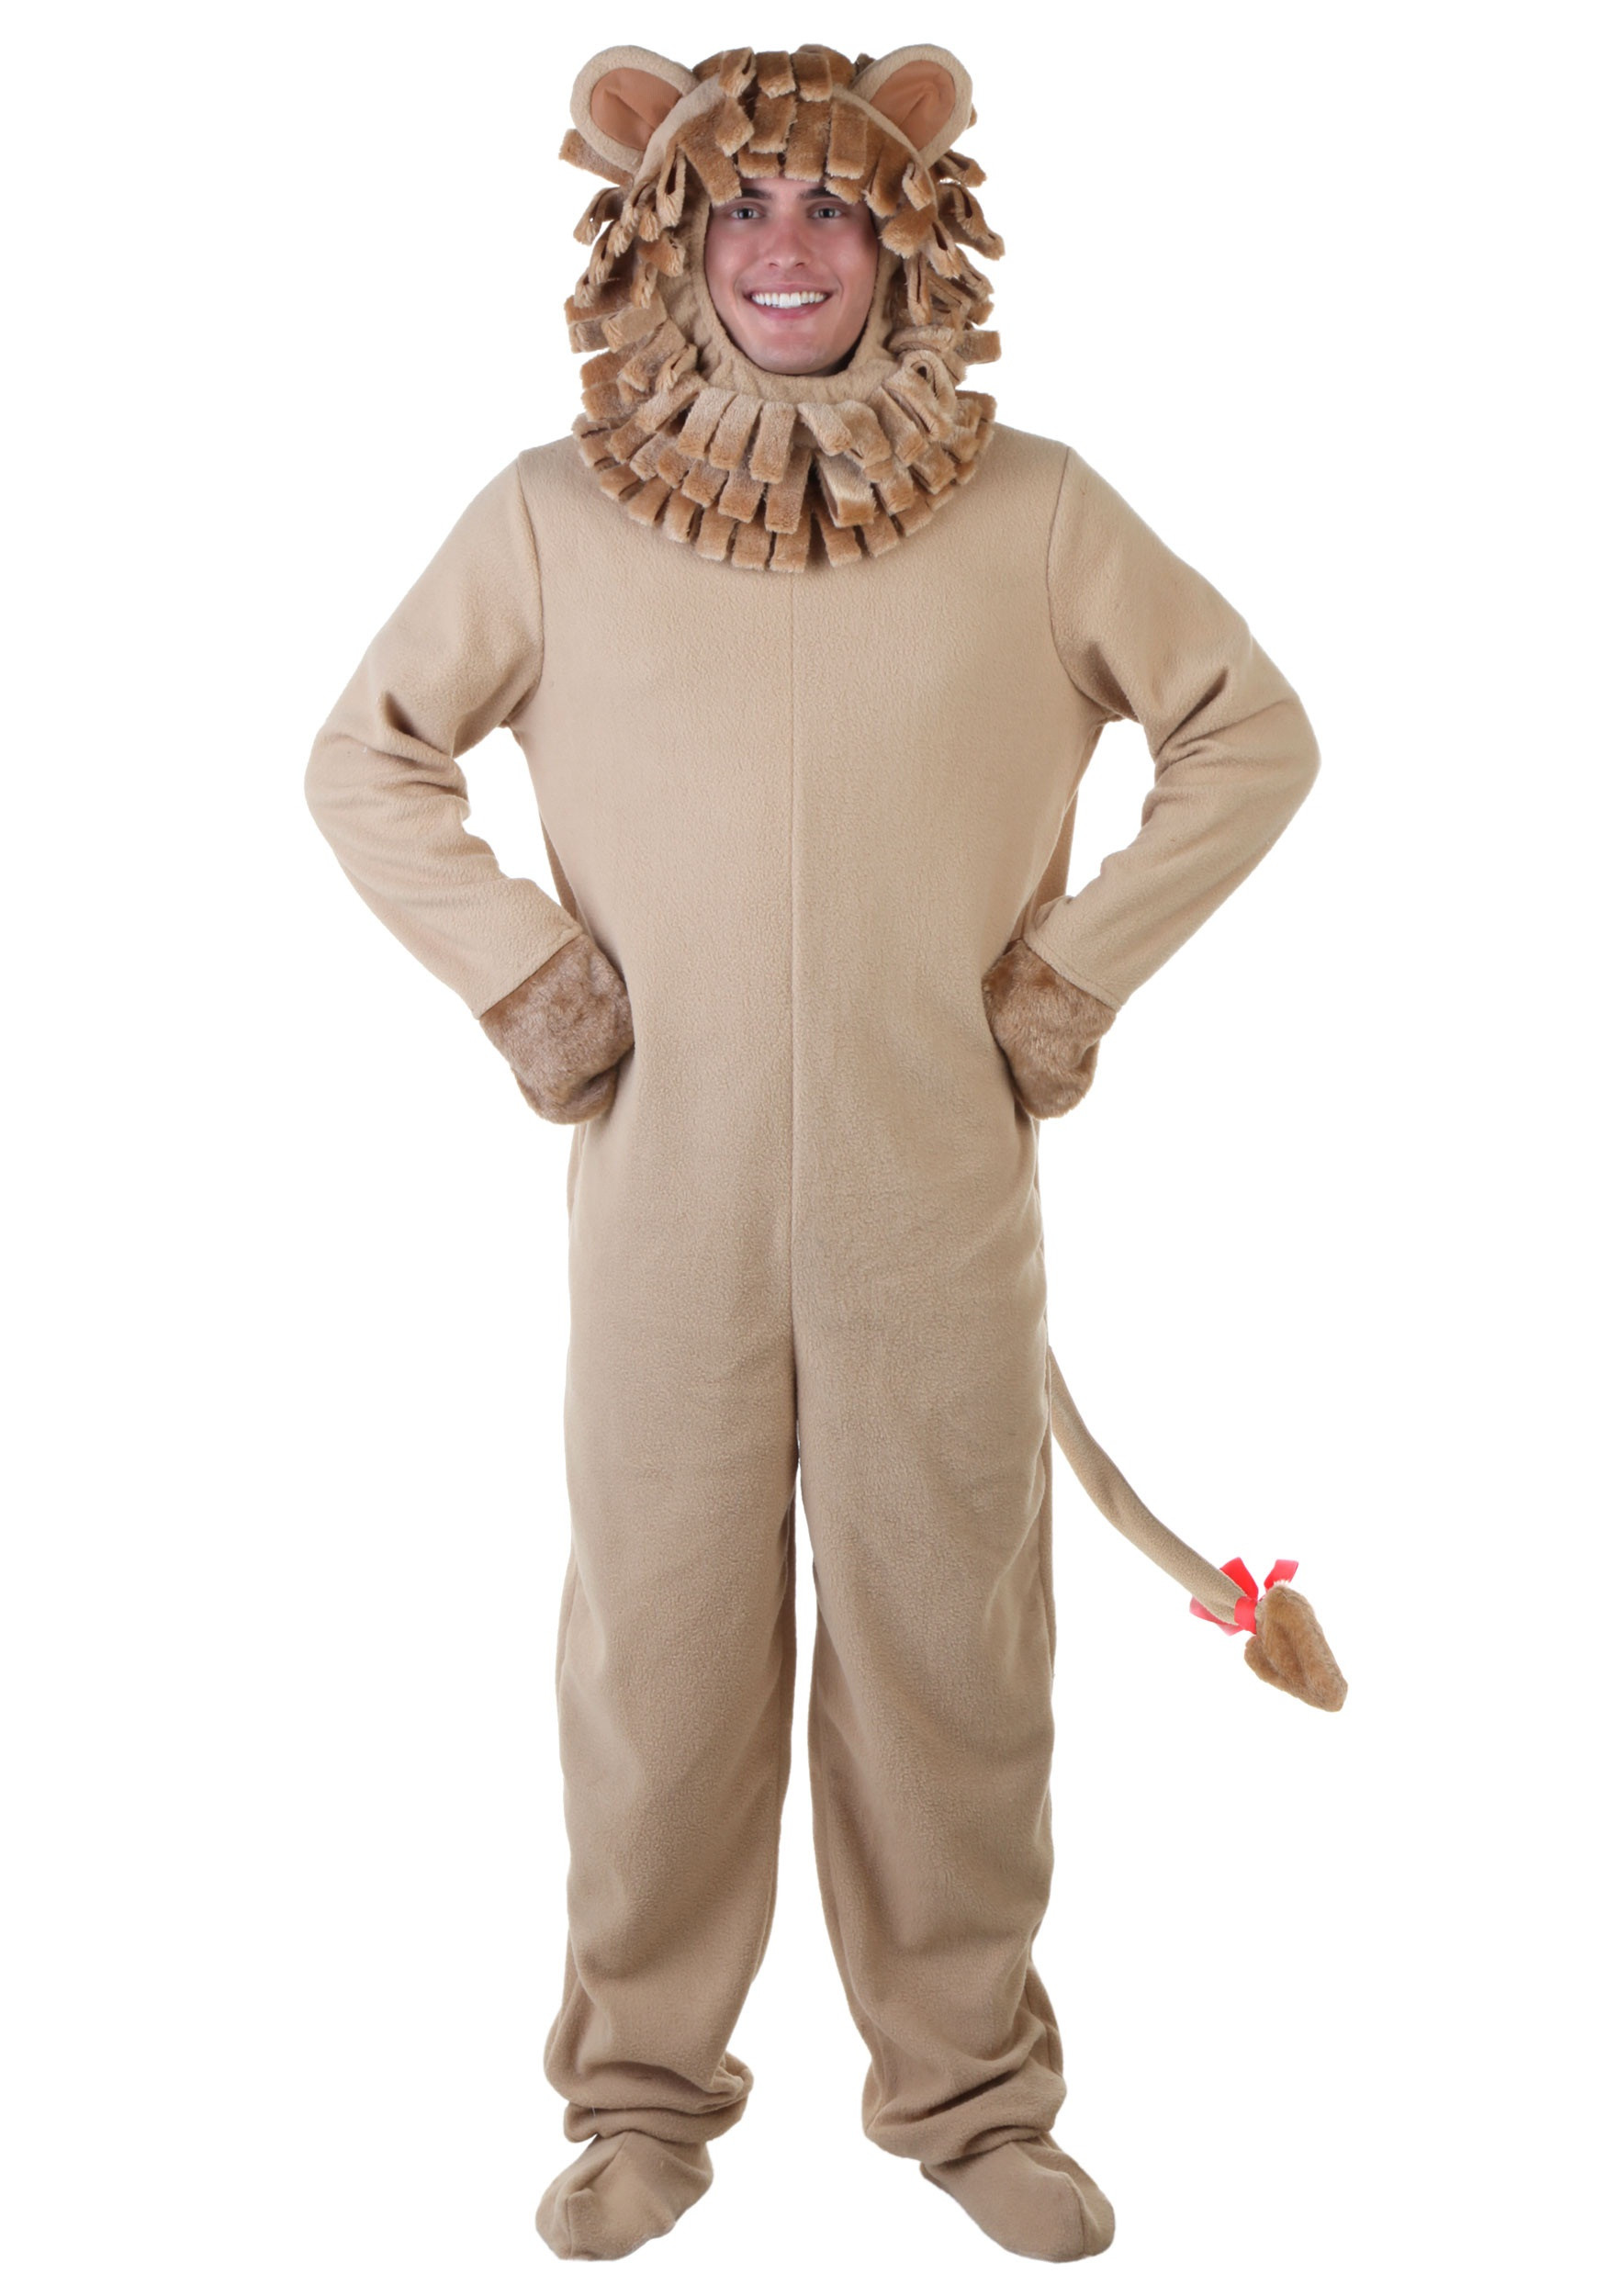 DIY Lion Costume For Adults
 Adult Lion Costume